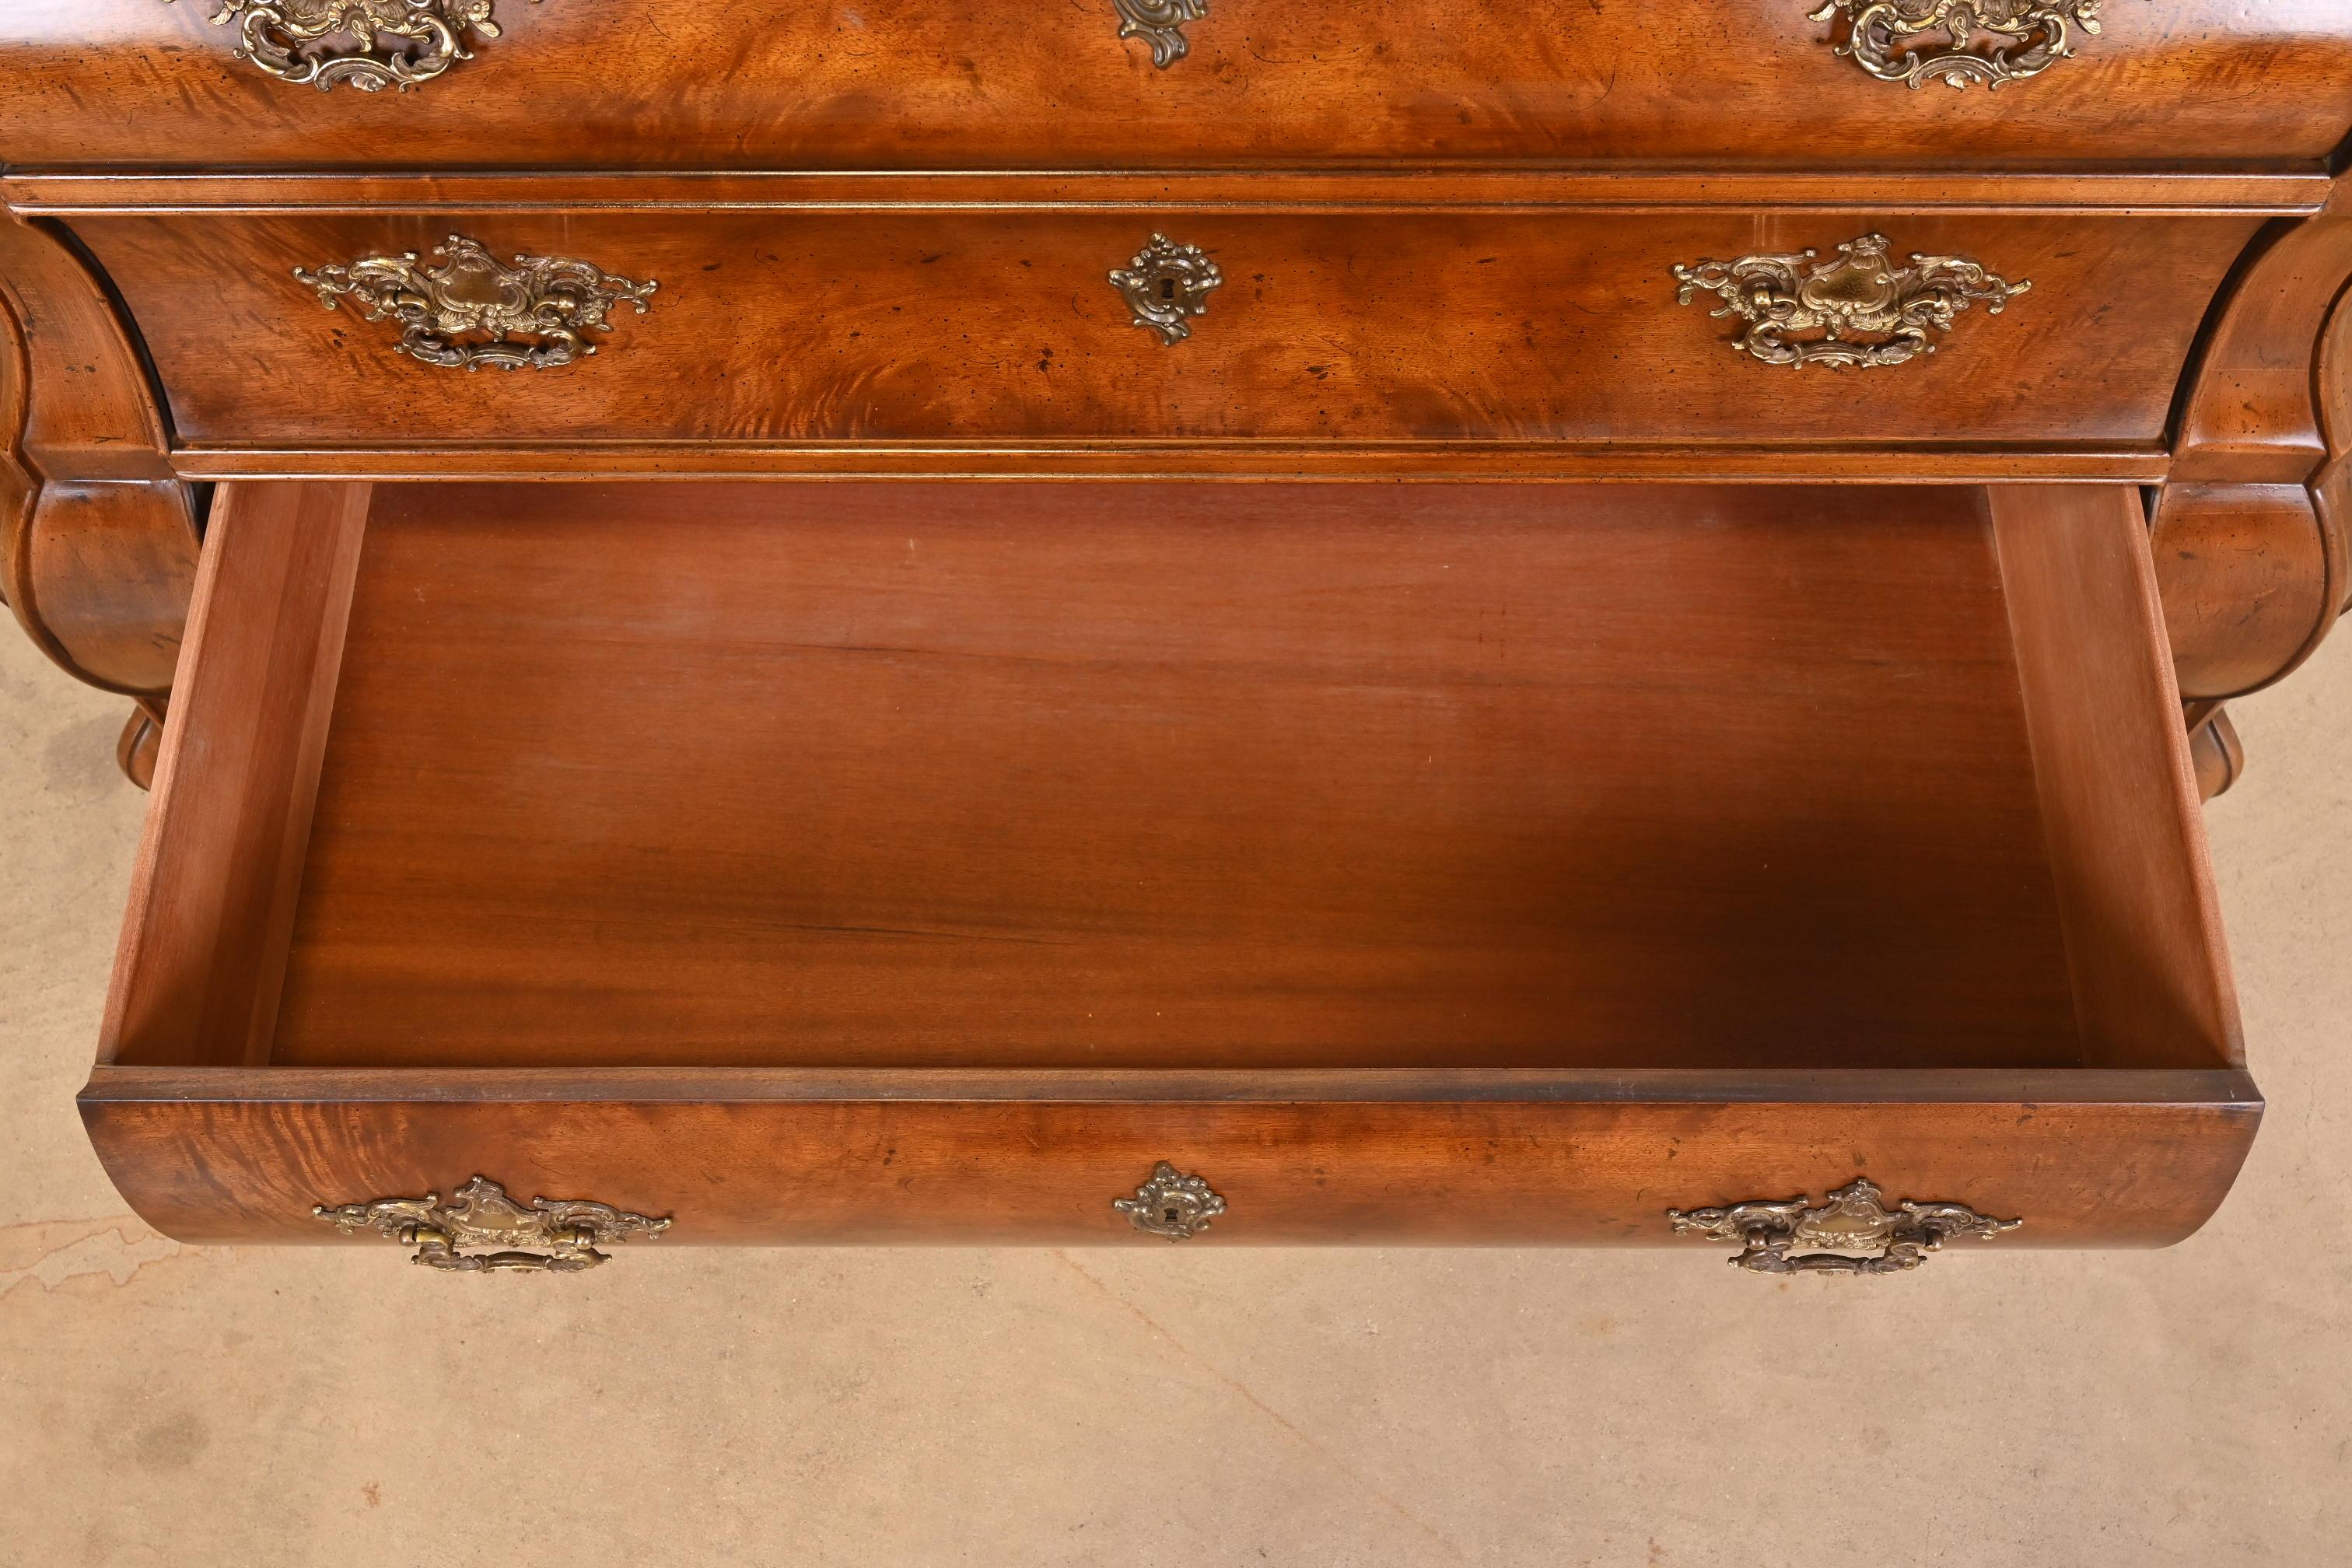 Henredon Italian Baroque Burled Mahogany Bombay Chests or Commodes, Pair For Sale 8